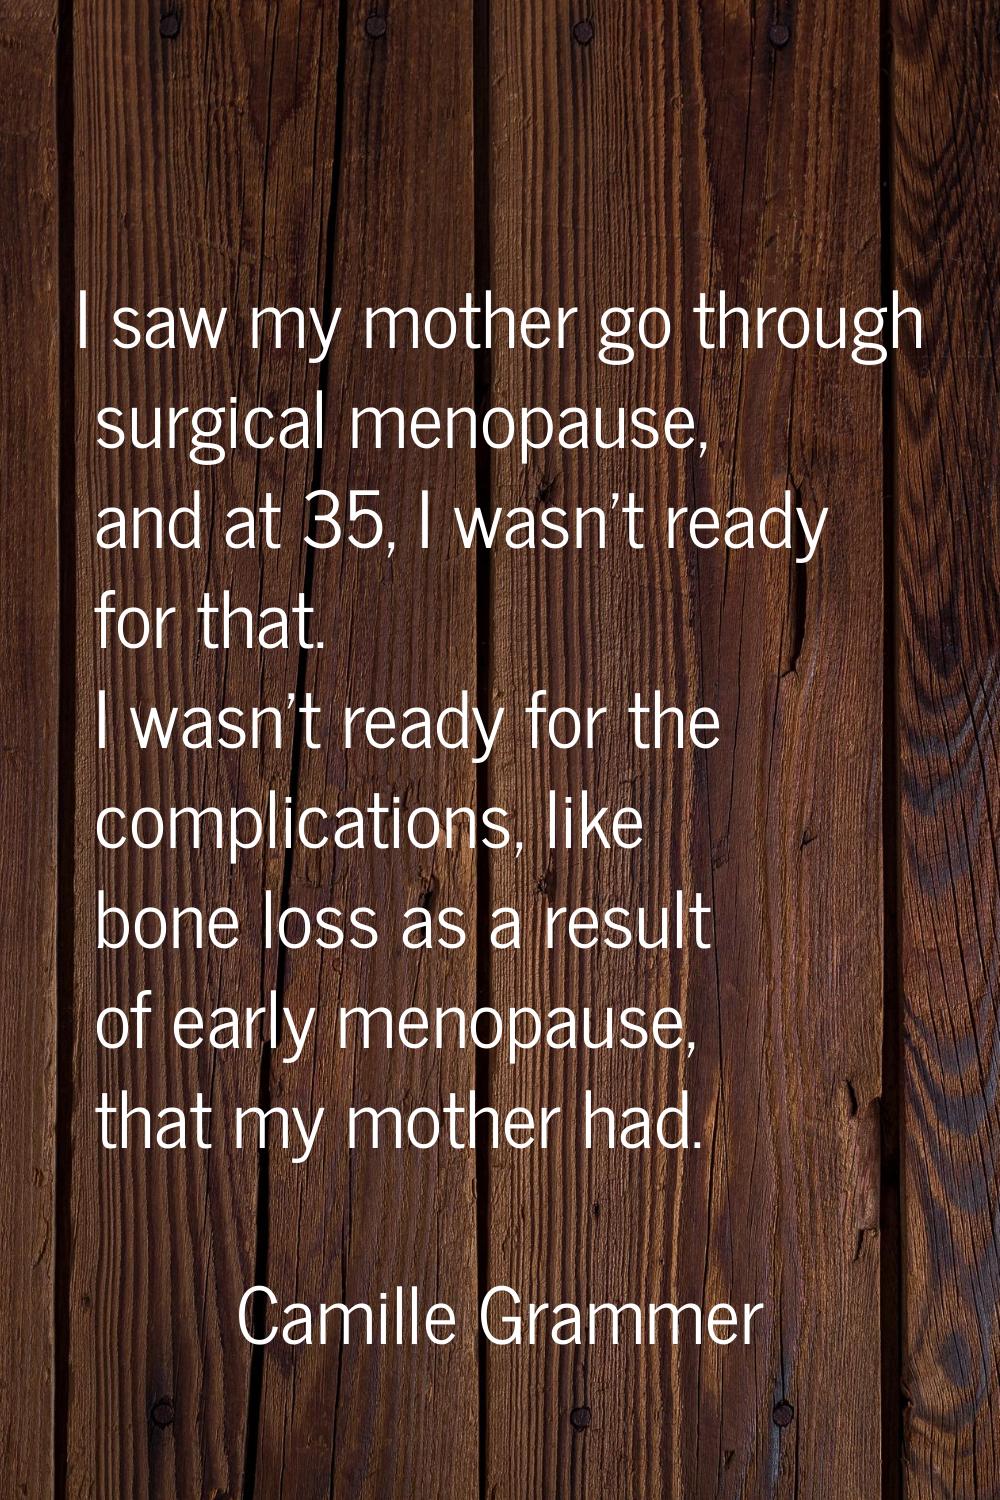 I saw my mother go through surgical menopause, and at 35, I wasn't ready for that. I wasn't ready f